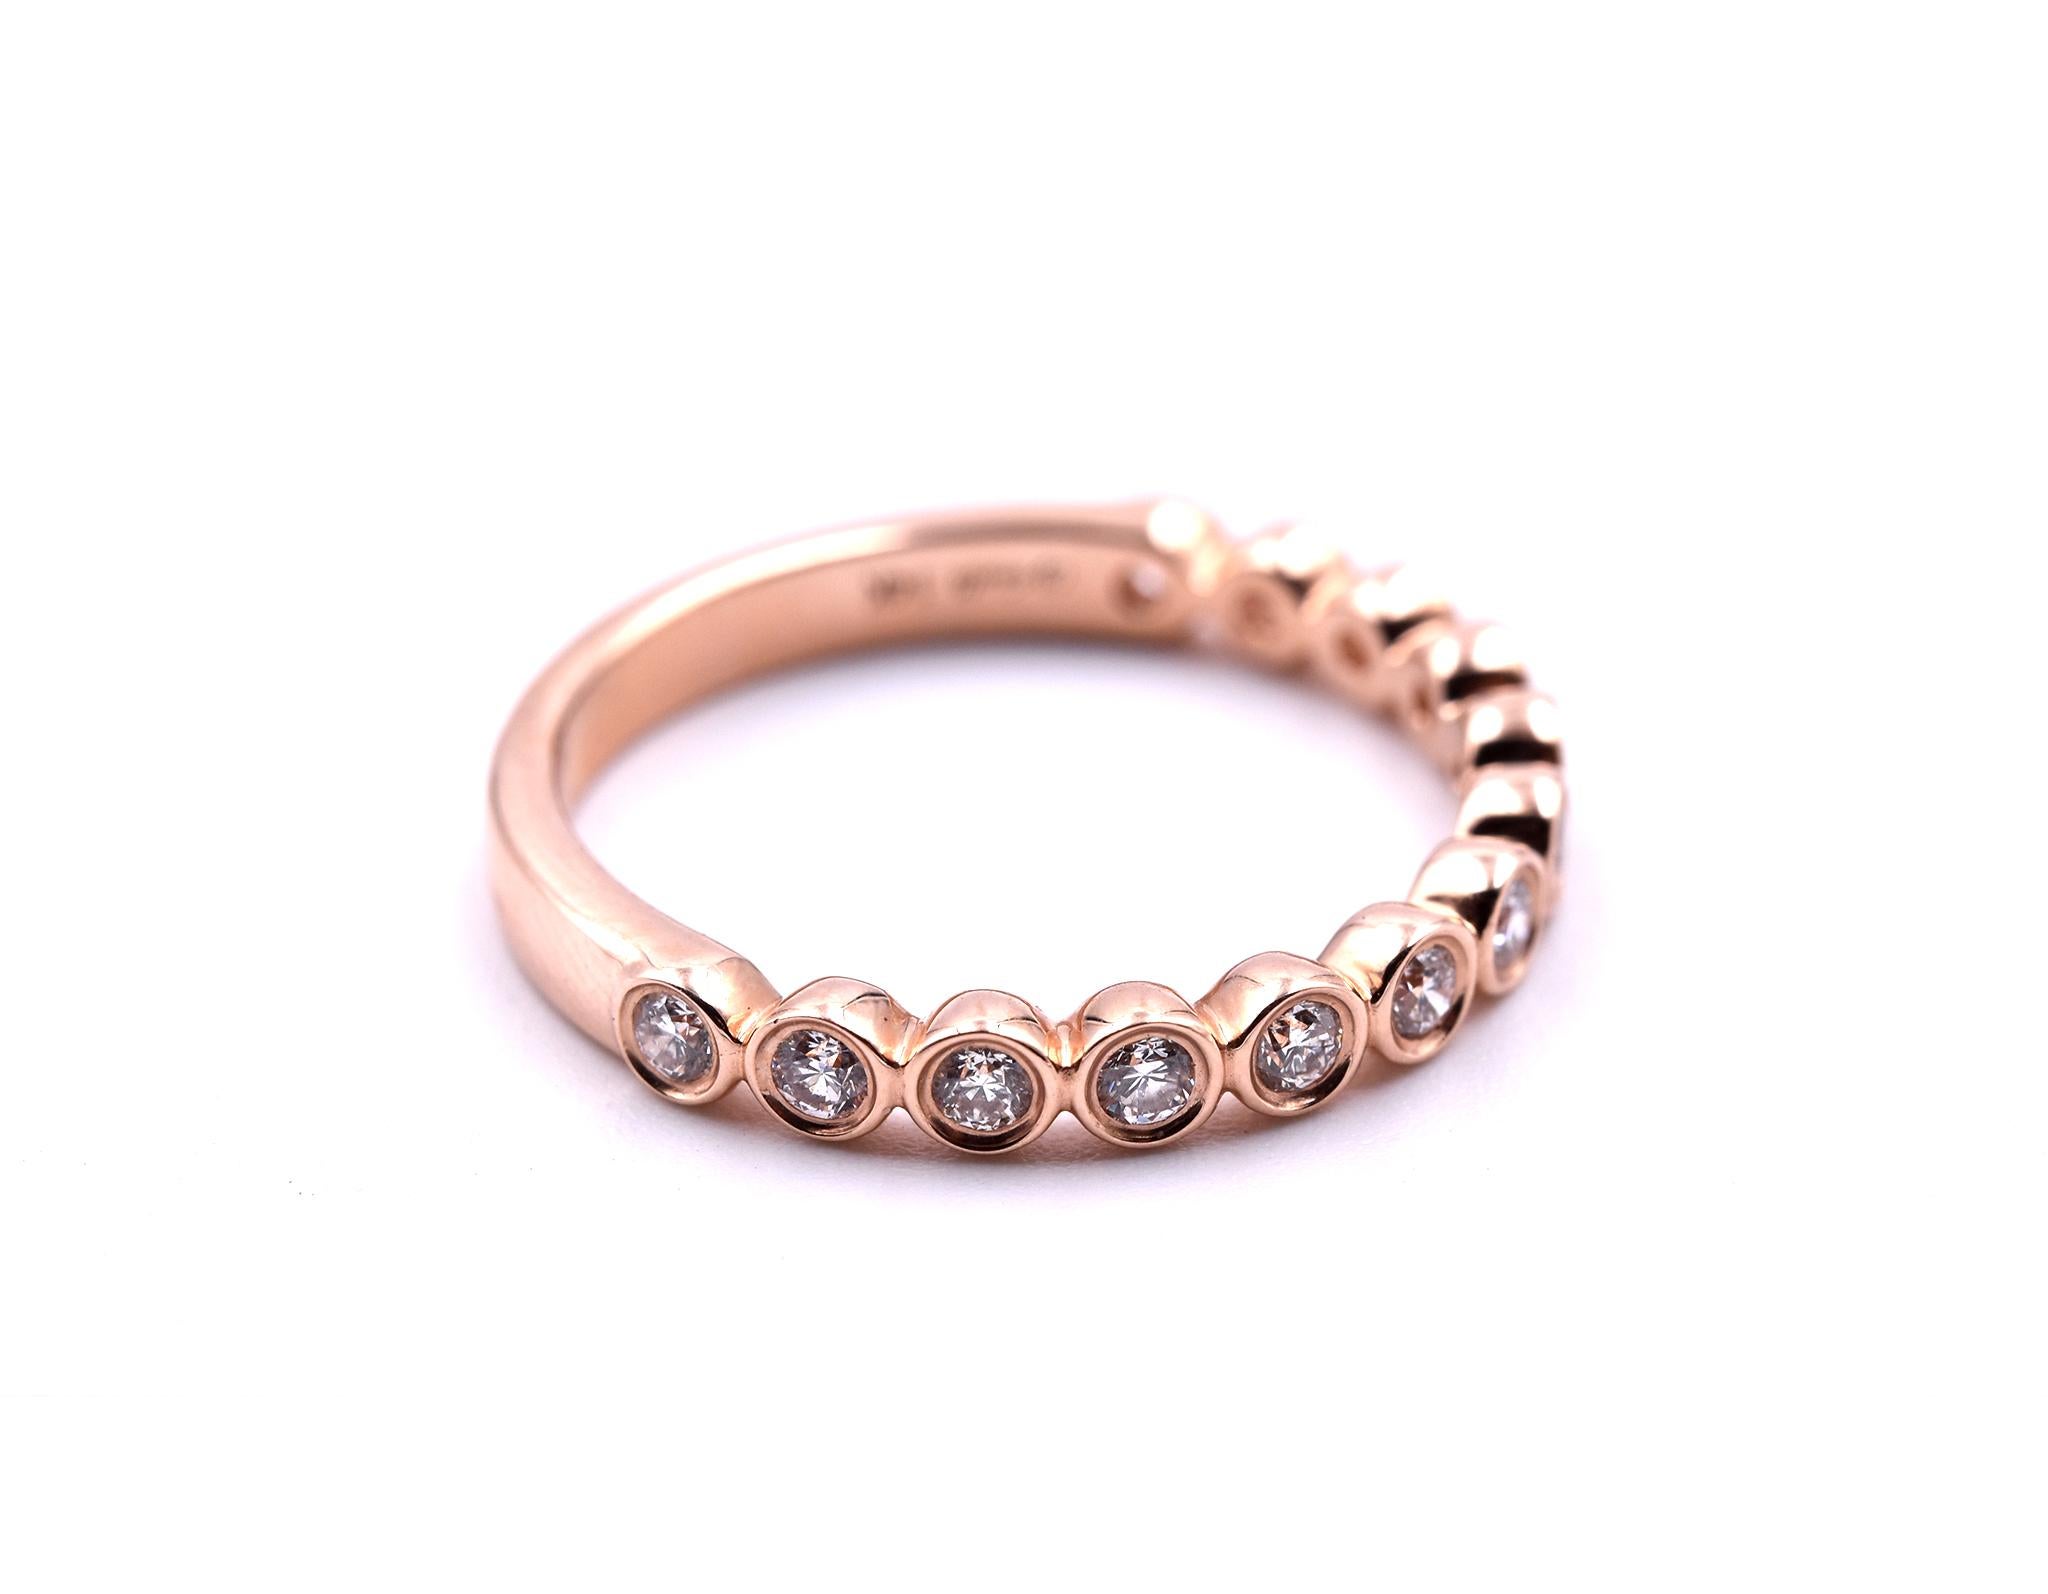 Designer: custom design
Material: 14k rose gold
Diamonds: 13 round brilliant cut = .36cttw
Color: G
Clarity: VS
Ring size: 6 ½ (please allow two additional shipping days for sizing requests)
Dimensions: ring is approximately 2.74mm wide
Weight: 2.53